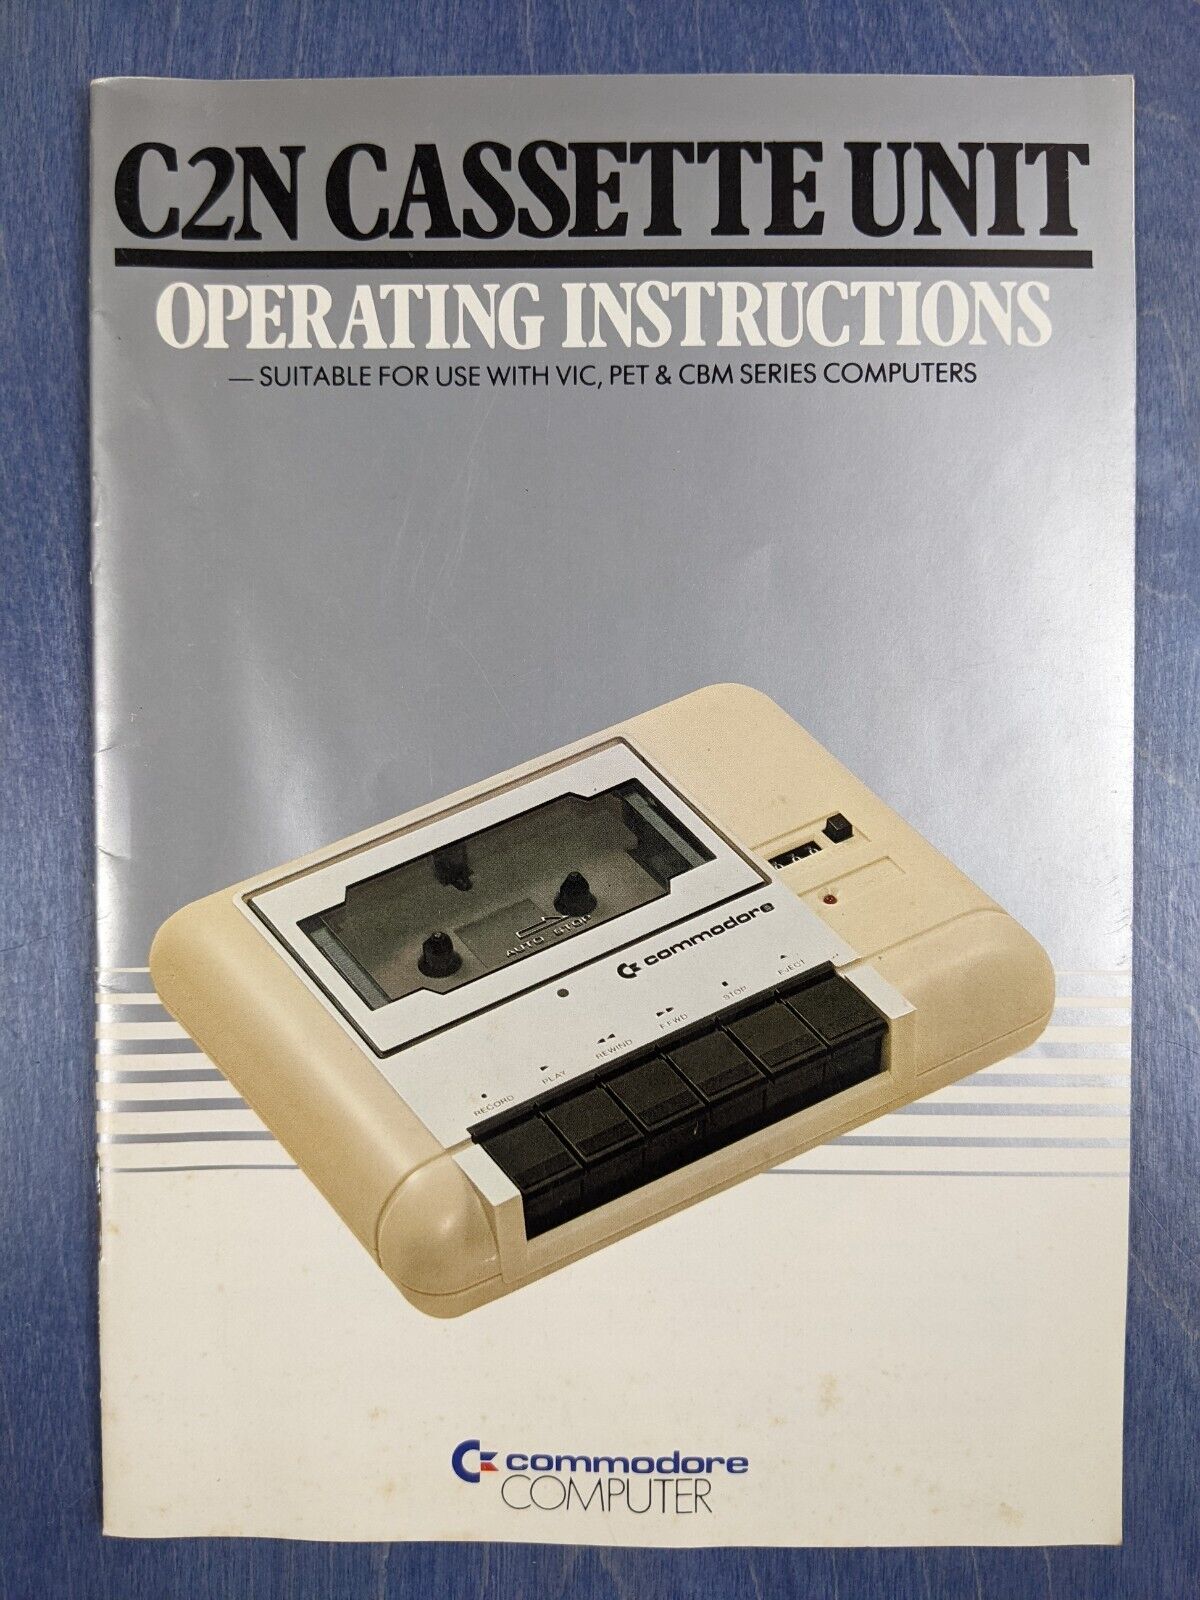 Vintage 1982 Commodore 64 C2N Cassette Unit Operating Instructions Manual ONLY